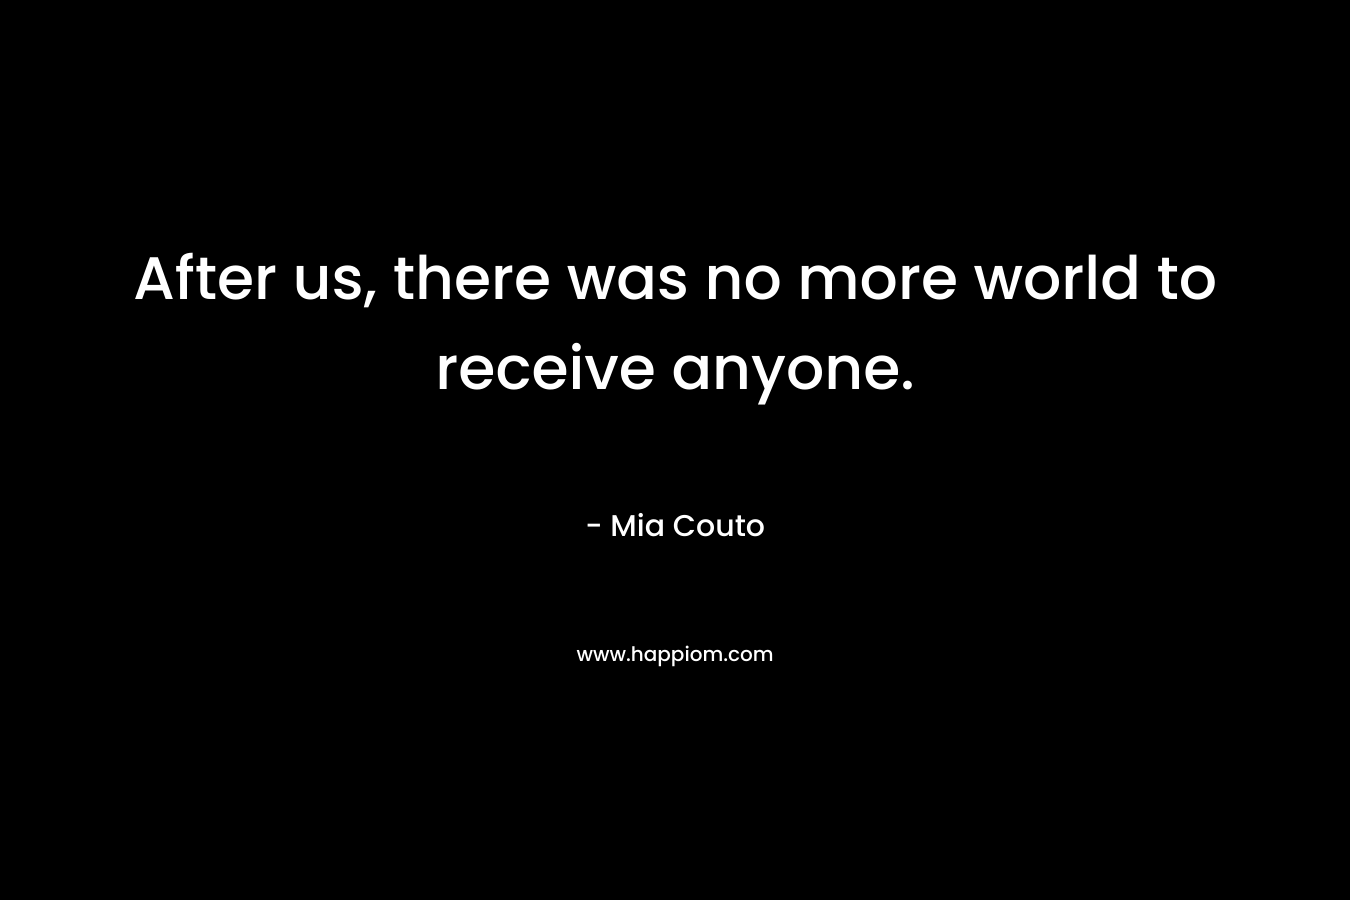 After us, there was no more world to receive anyone.